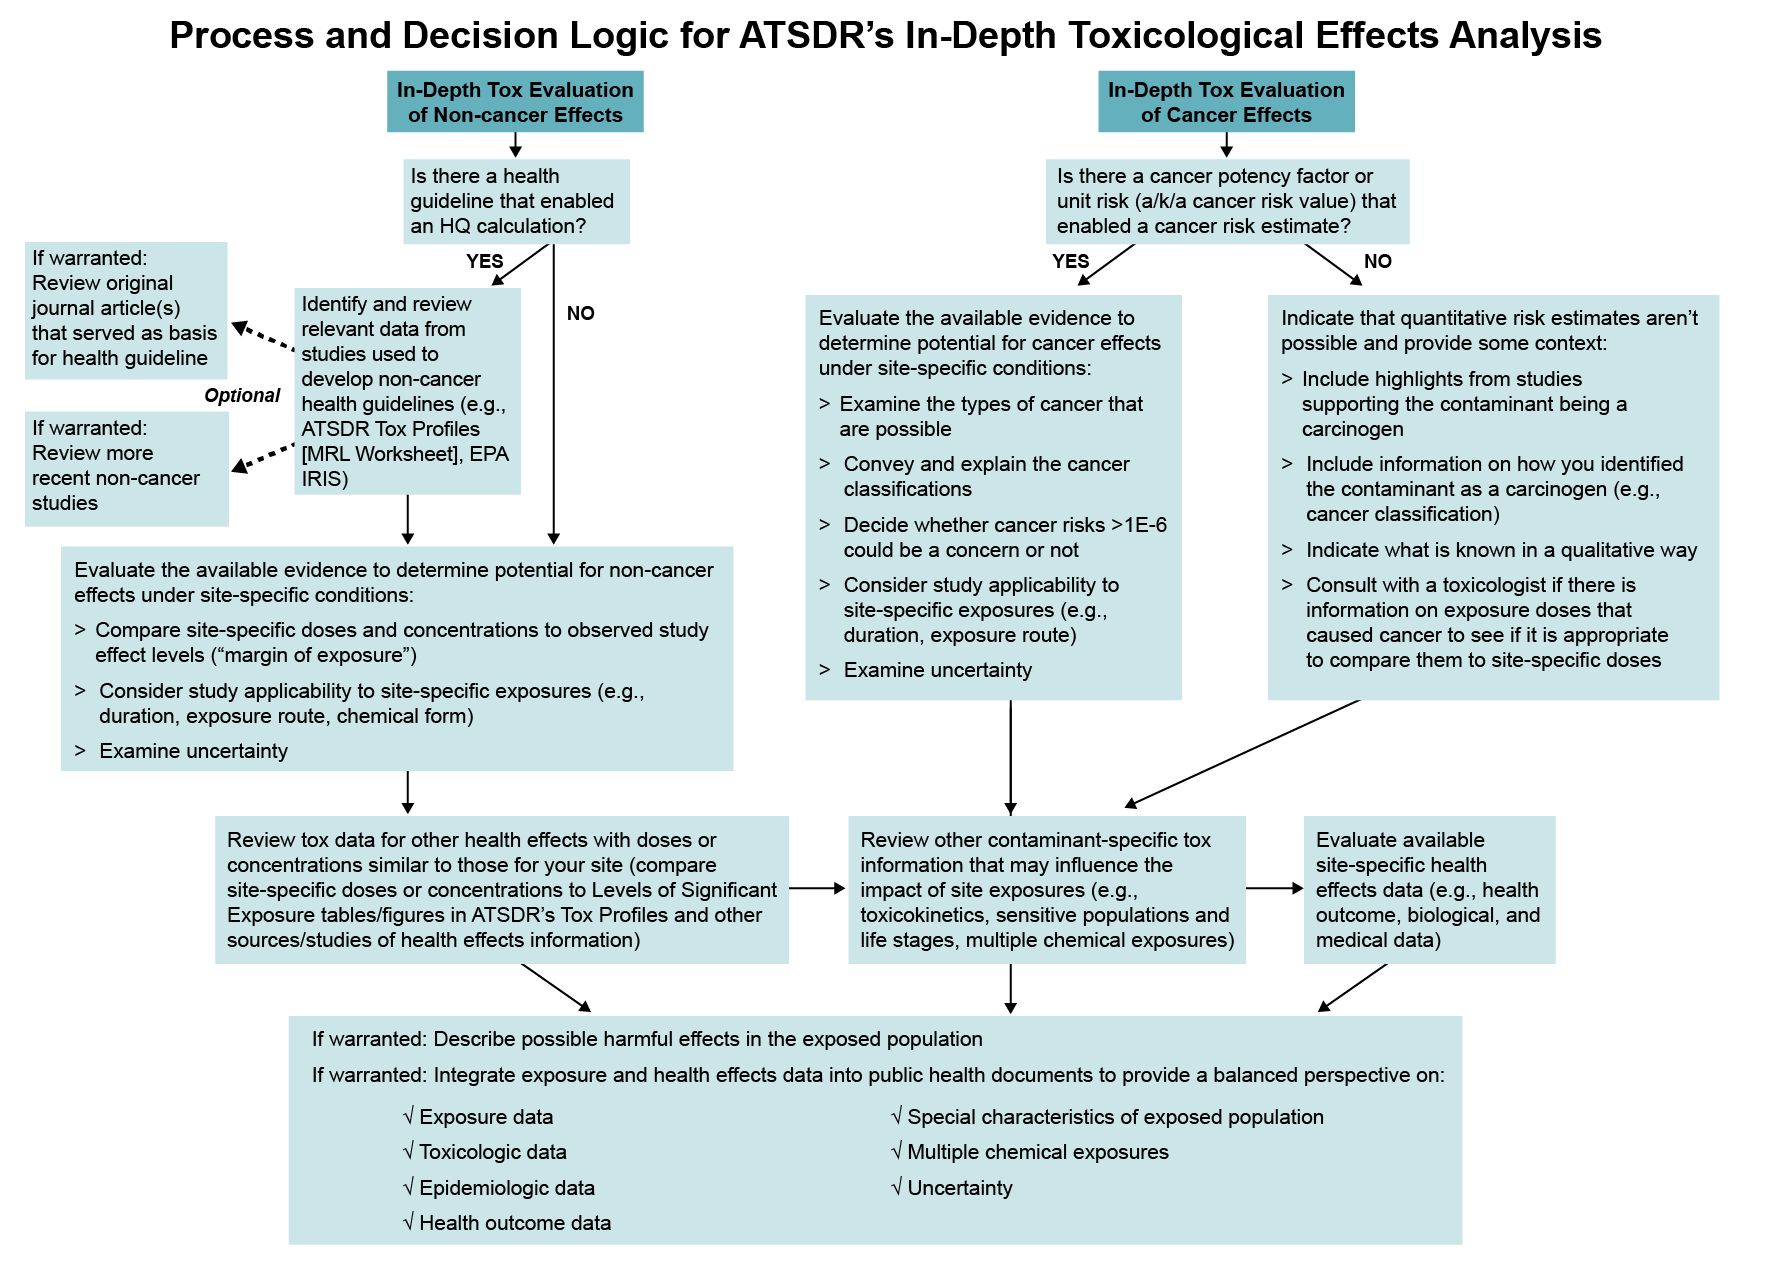 Process and decision logic for ATSDR's in-depth toxicological effects analysis. See link below for detailed description.